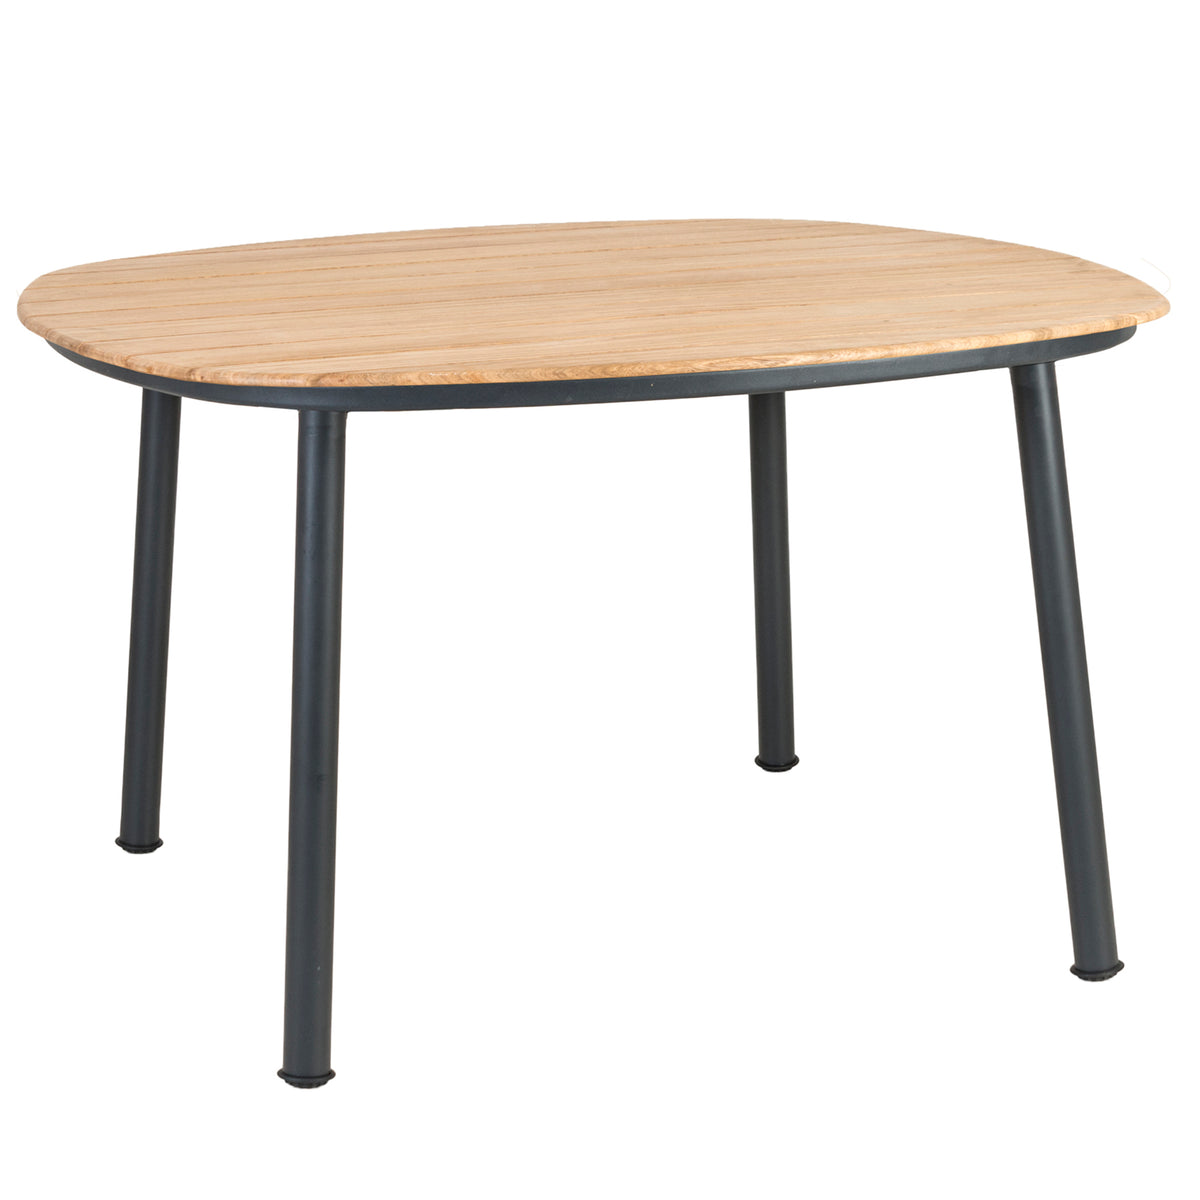 Alexander Rose Cordial Grey Shaped Dining Table with Roble Top (1.2m)